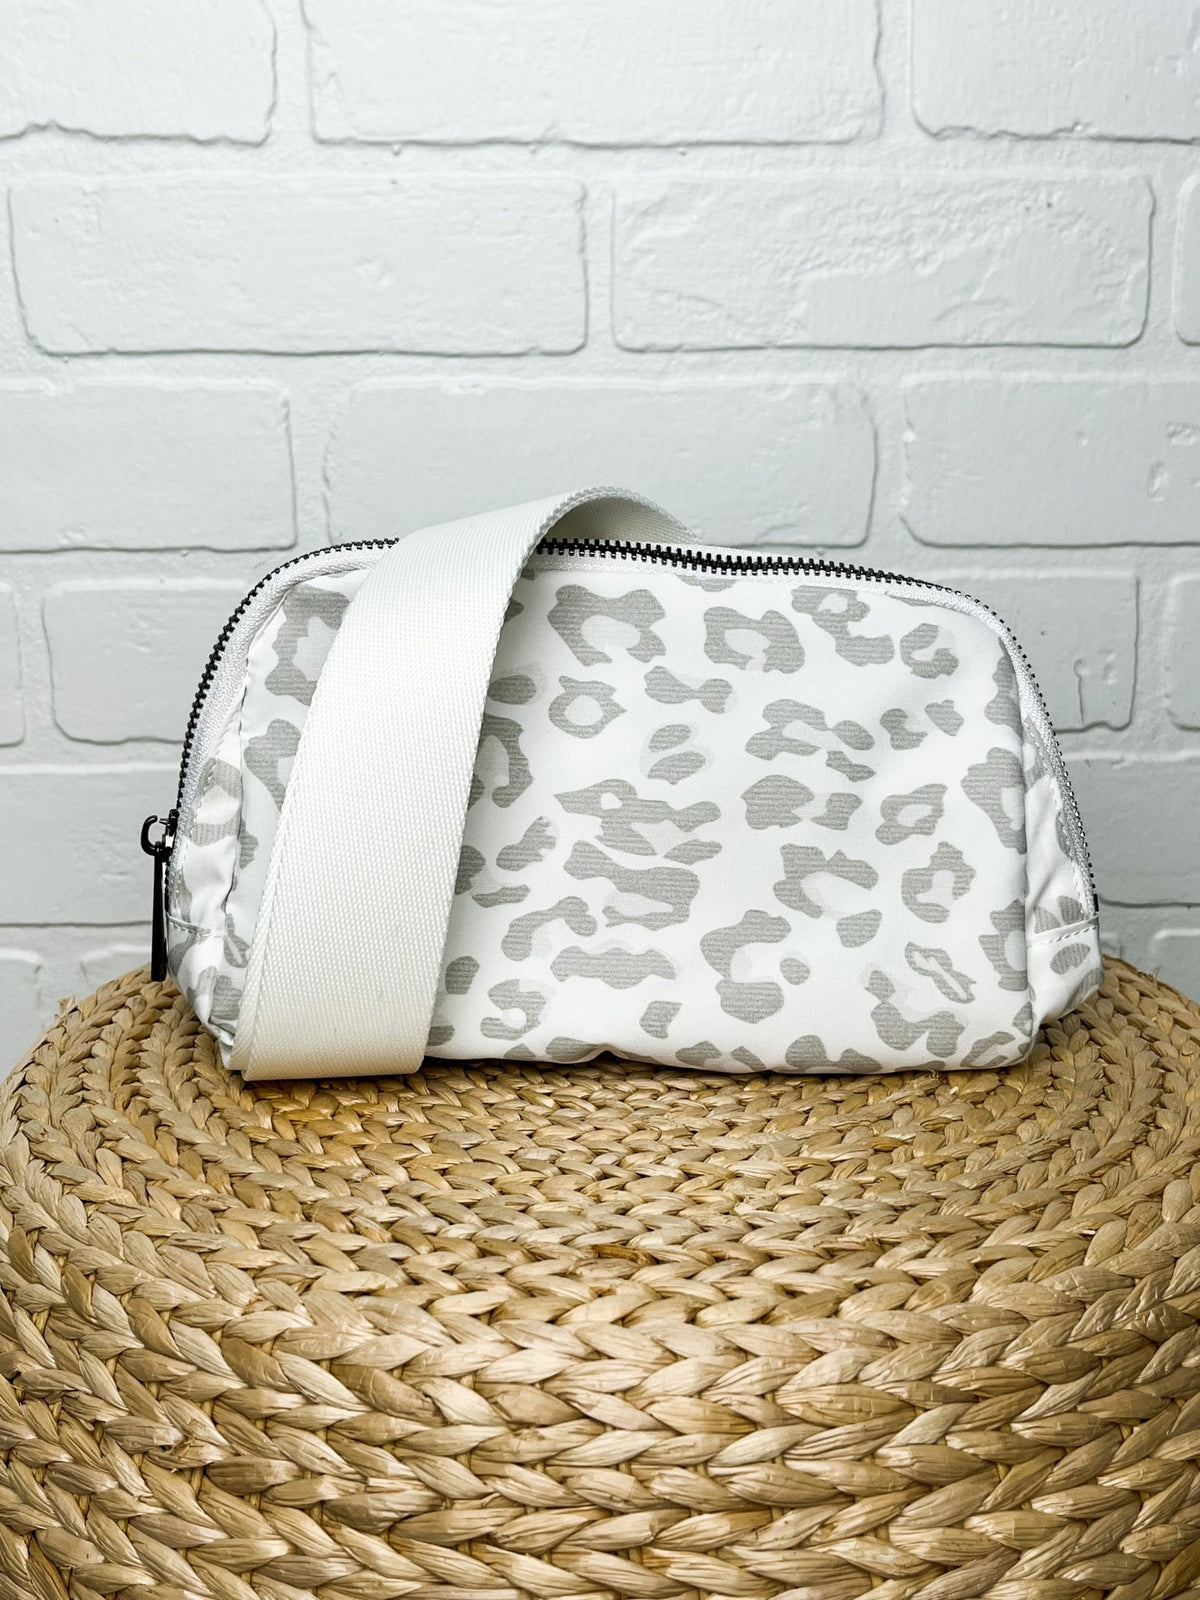 Sling belt bag grey leopard - Trendy Bags at Lush Fashion Lounge Boutique in Oklahoma City